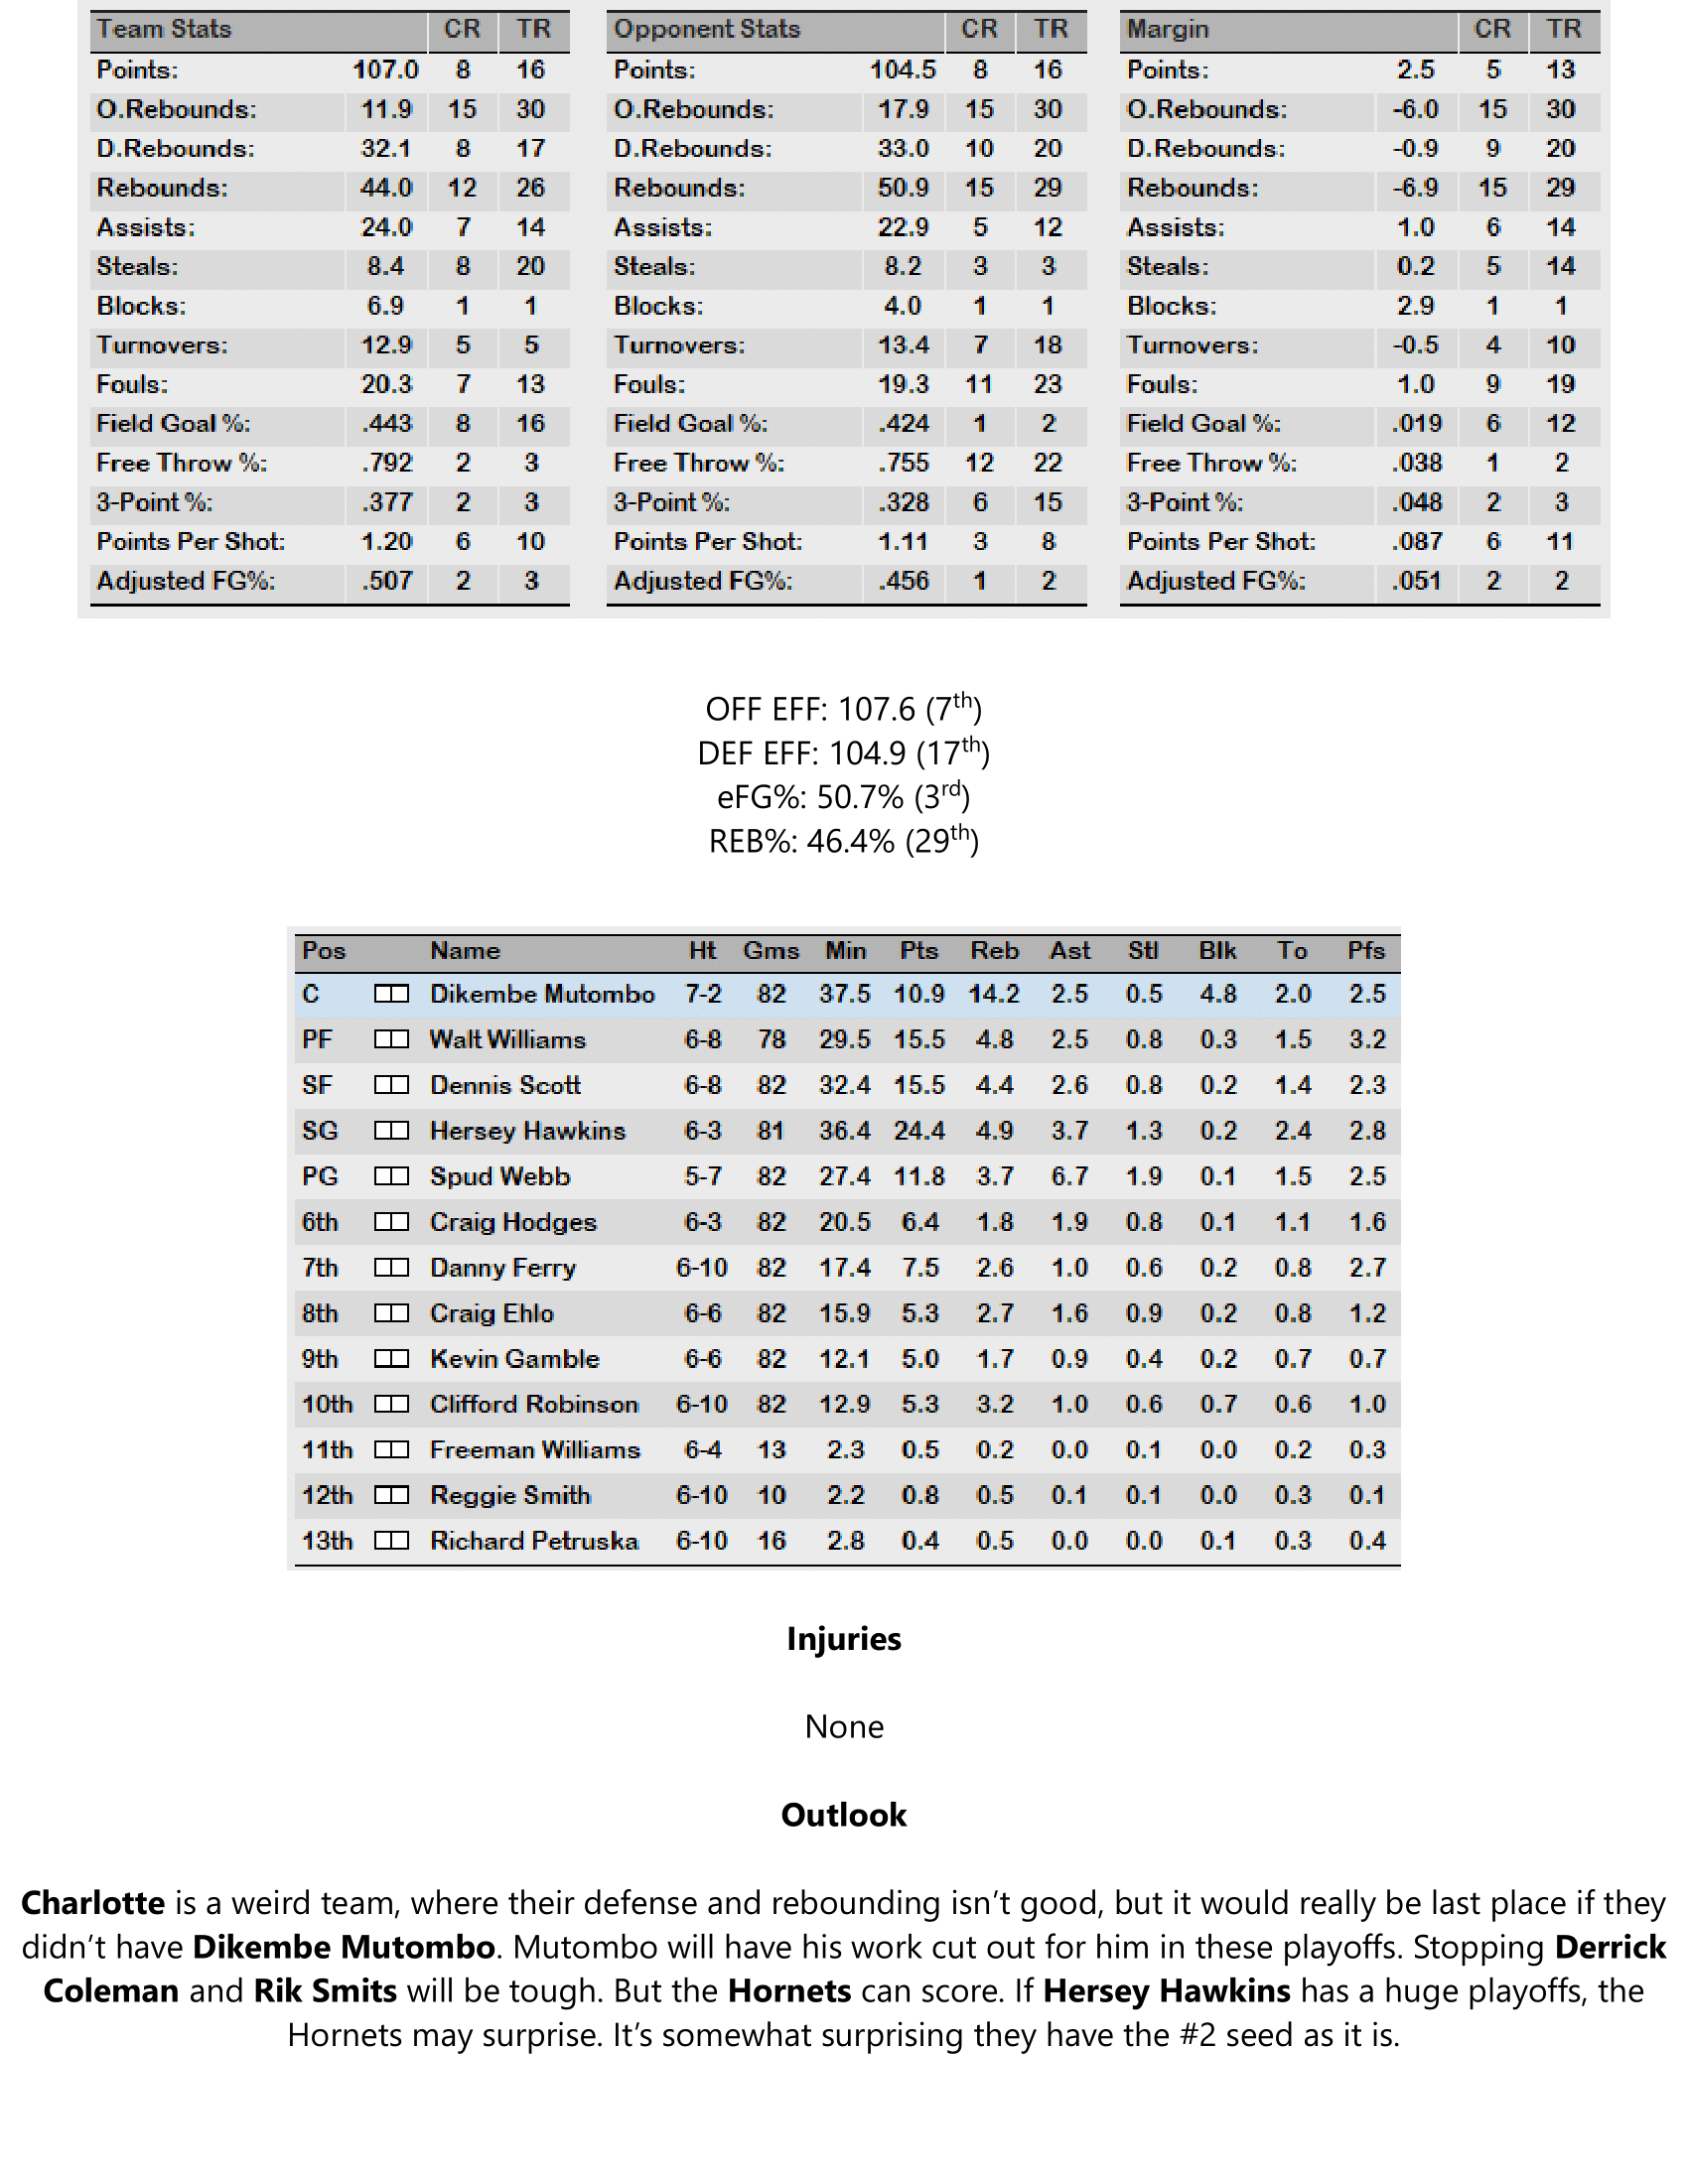 93-94-Part-4-Playoff-Preview-16.png